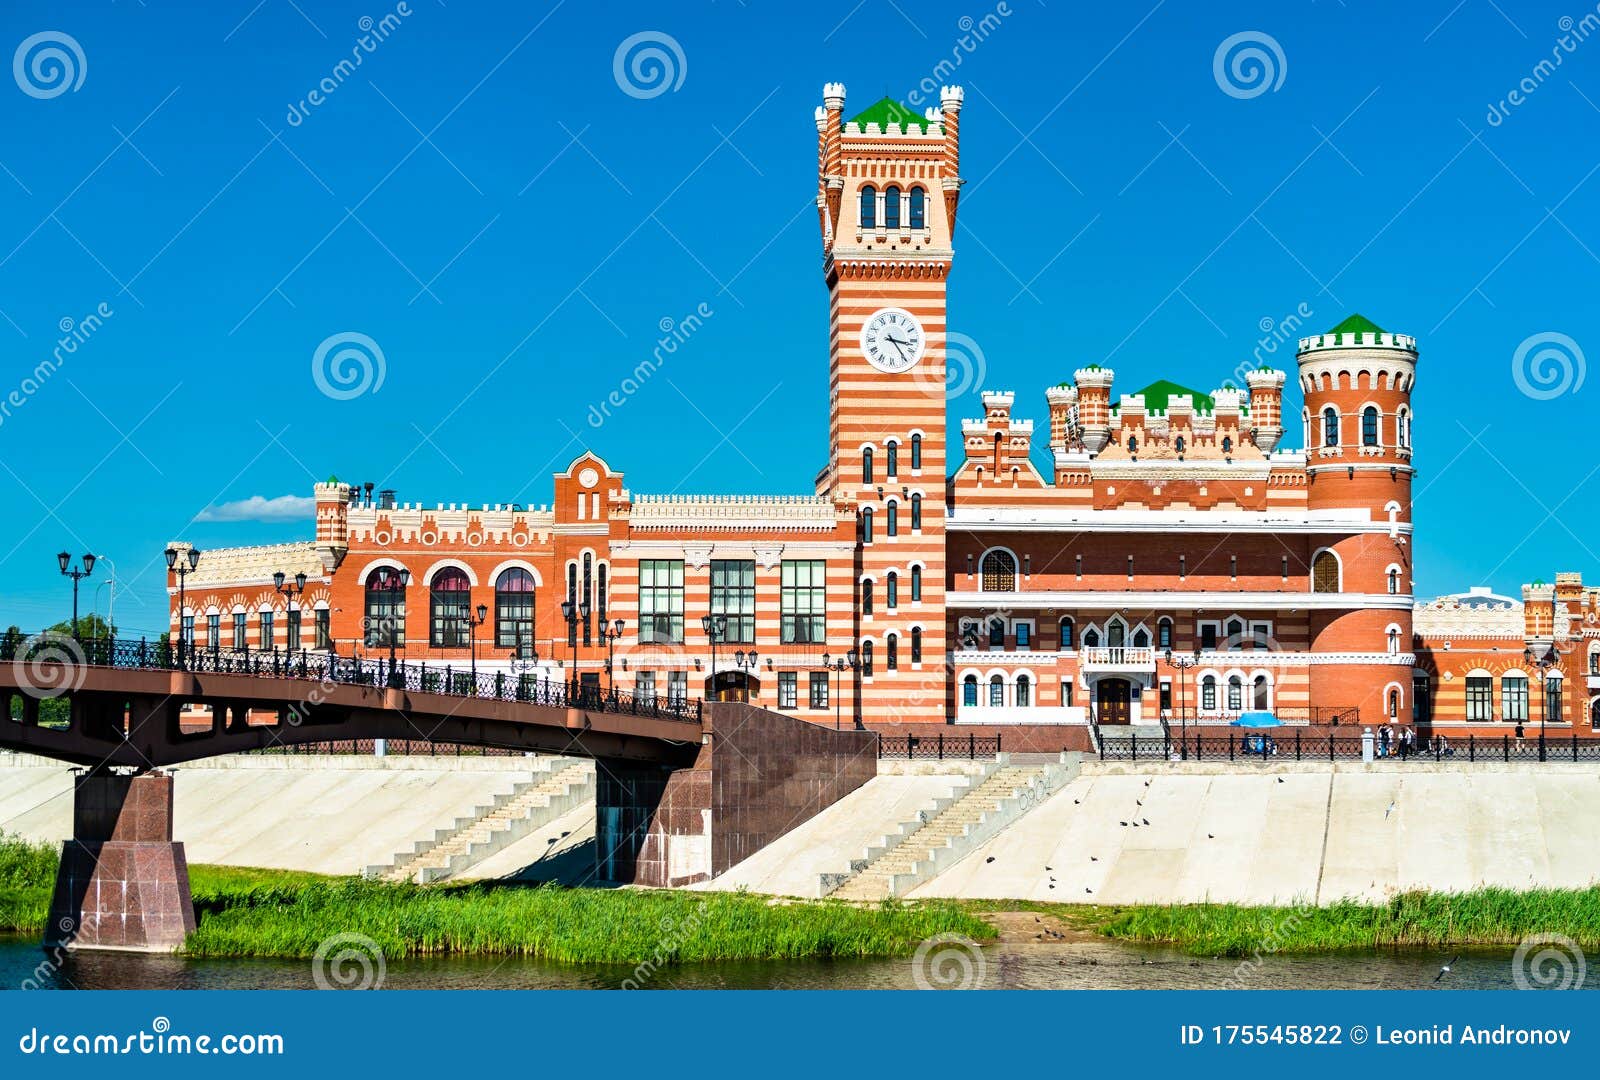 palace at the embankment of yoshkar-ola in russia